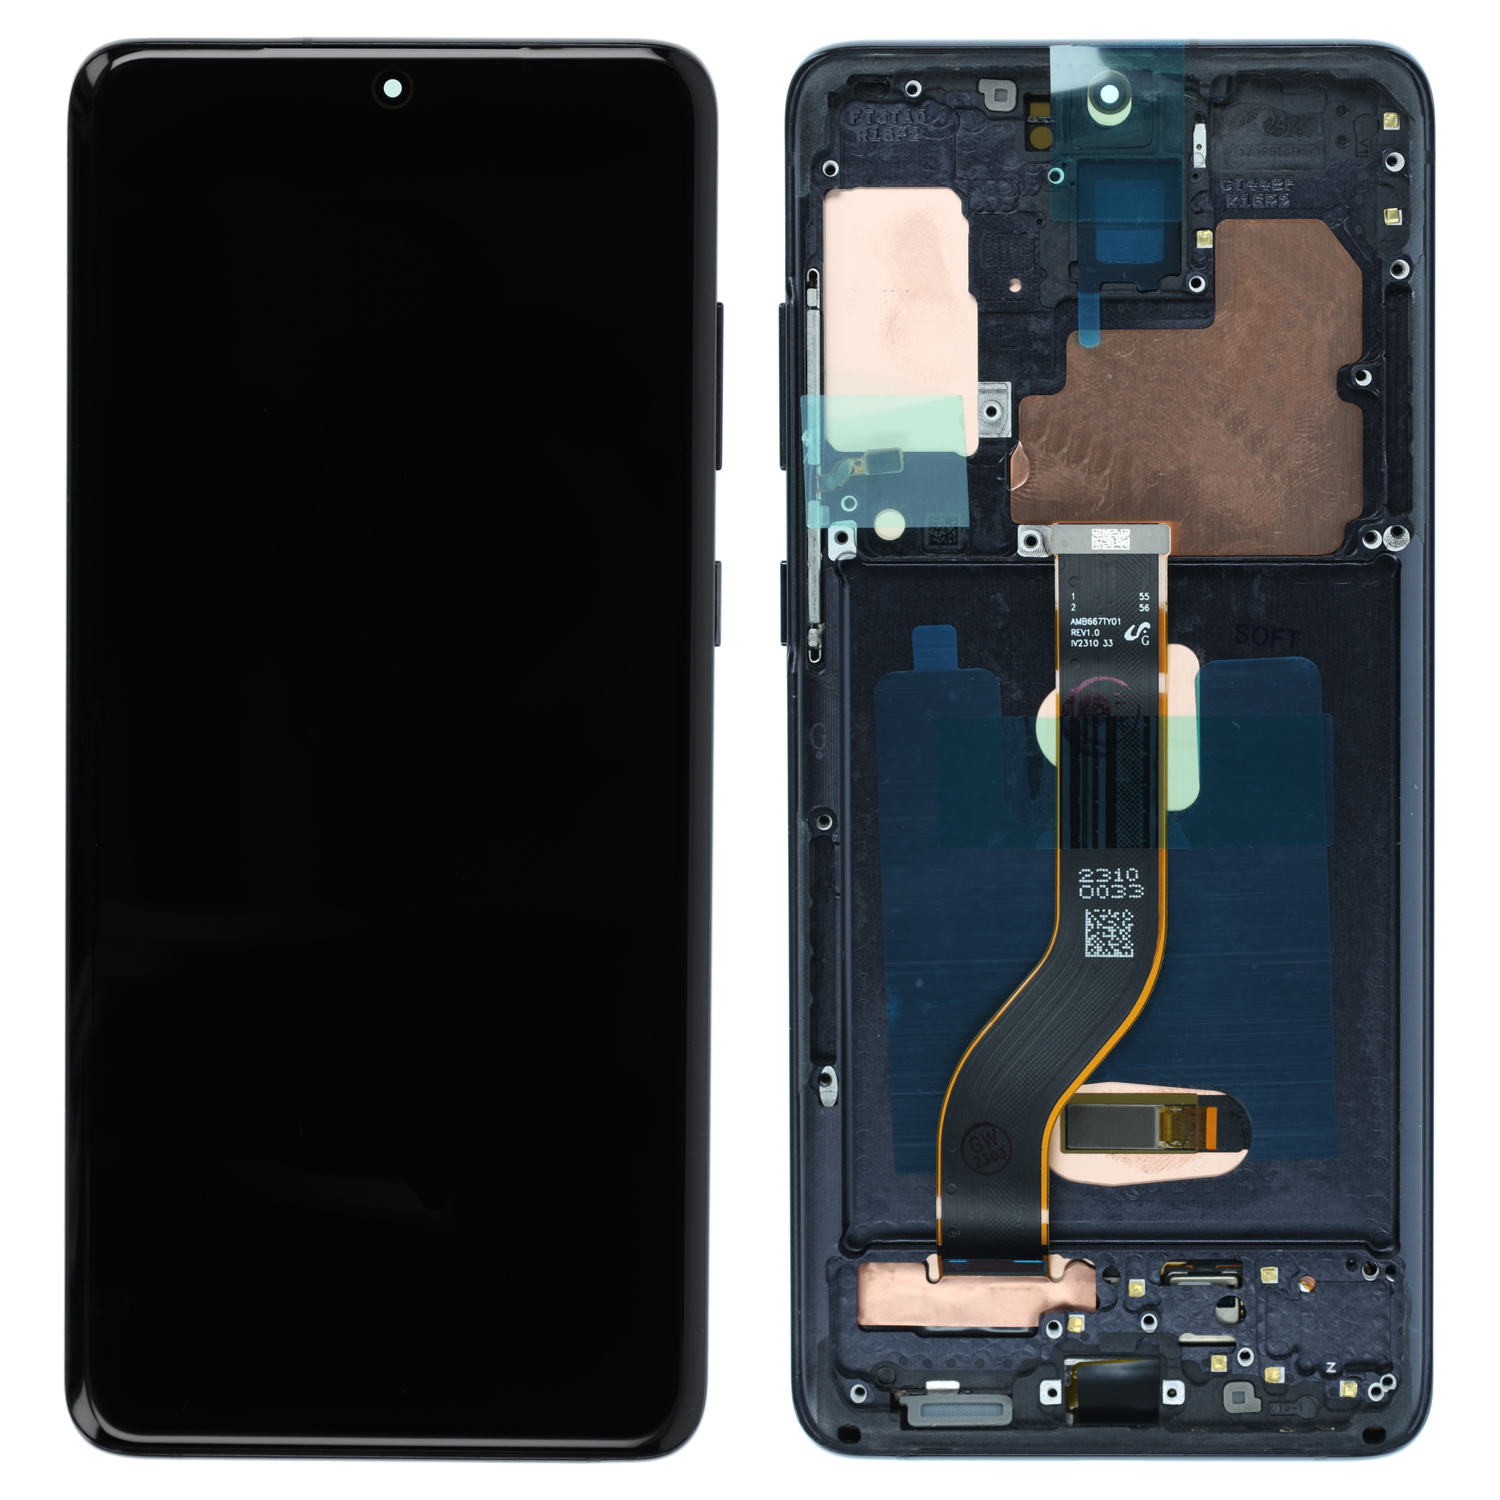 LCD Display compatible to Samsung Galaxy S20+ (G985) / S20+ 5G (G986) with frame, Black (Soft-OLED)